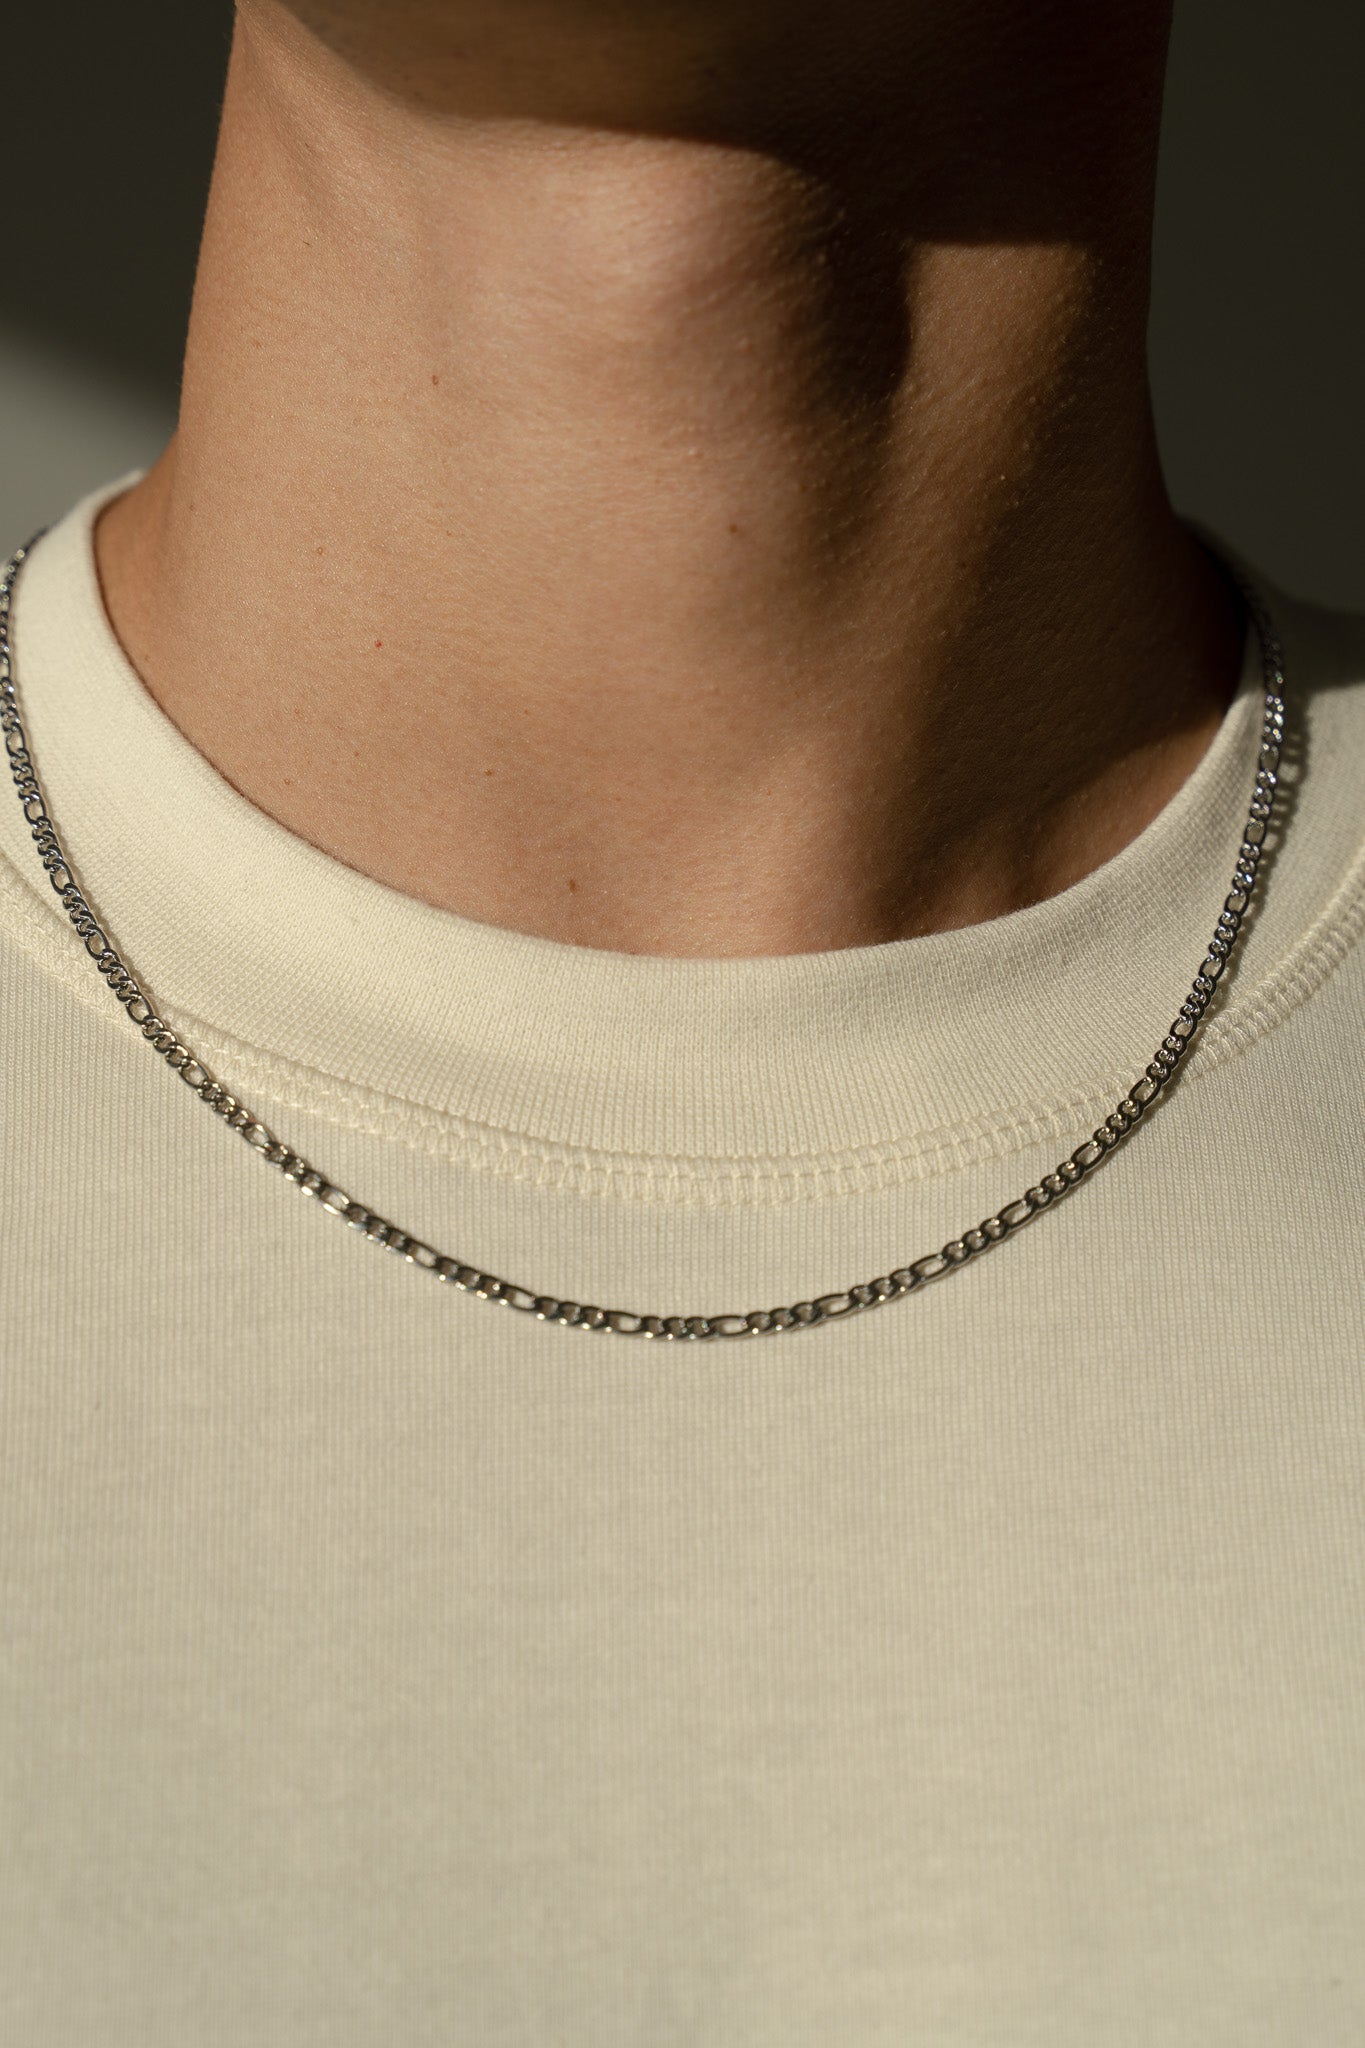 Alexander Necklace in White Gold - 3mm